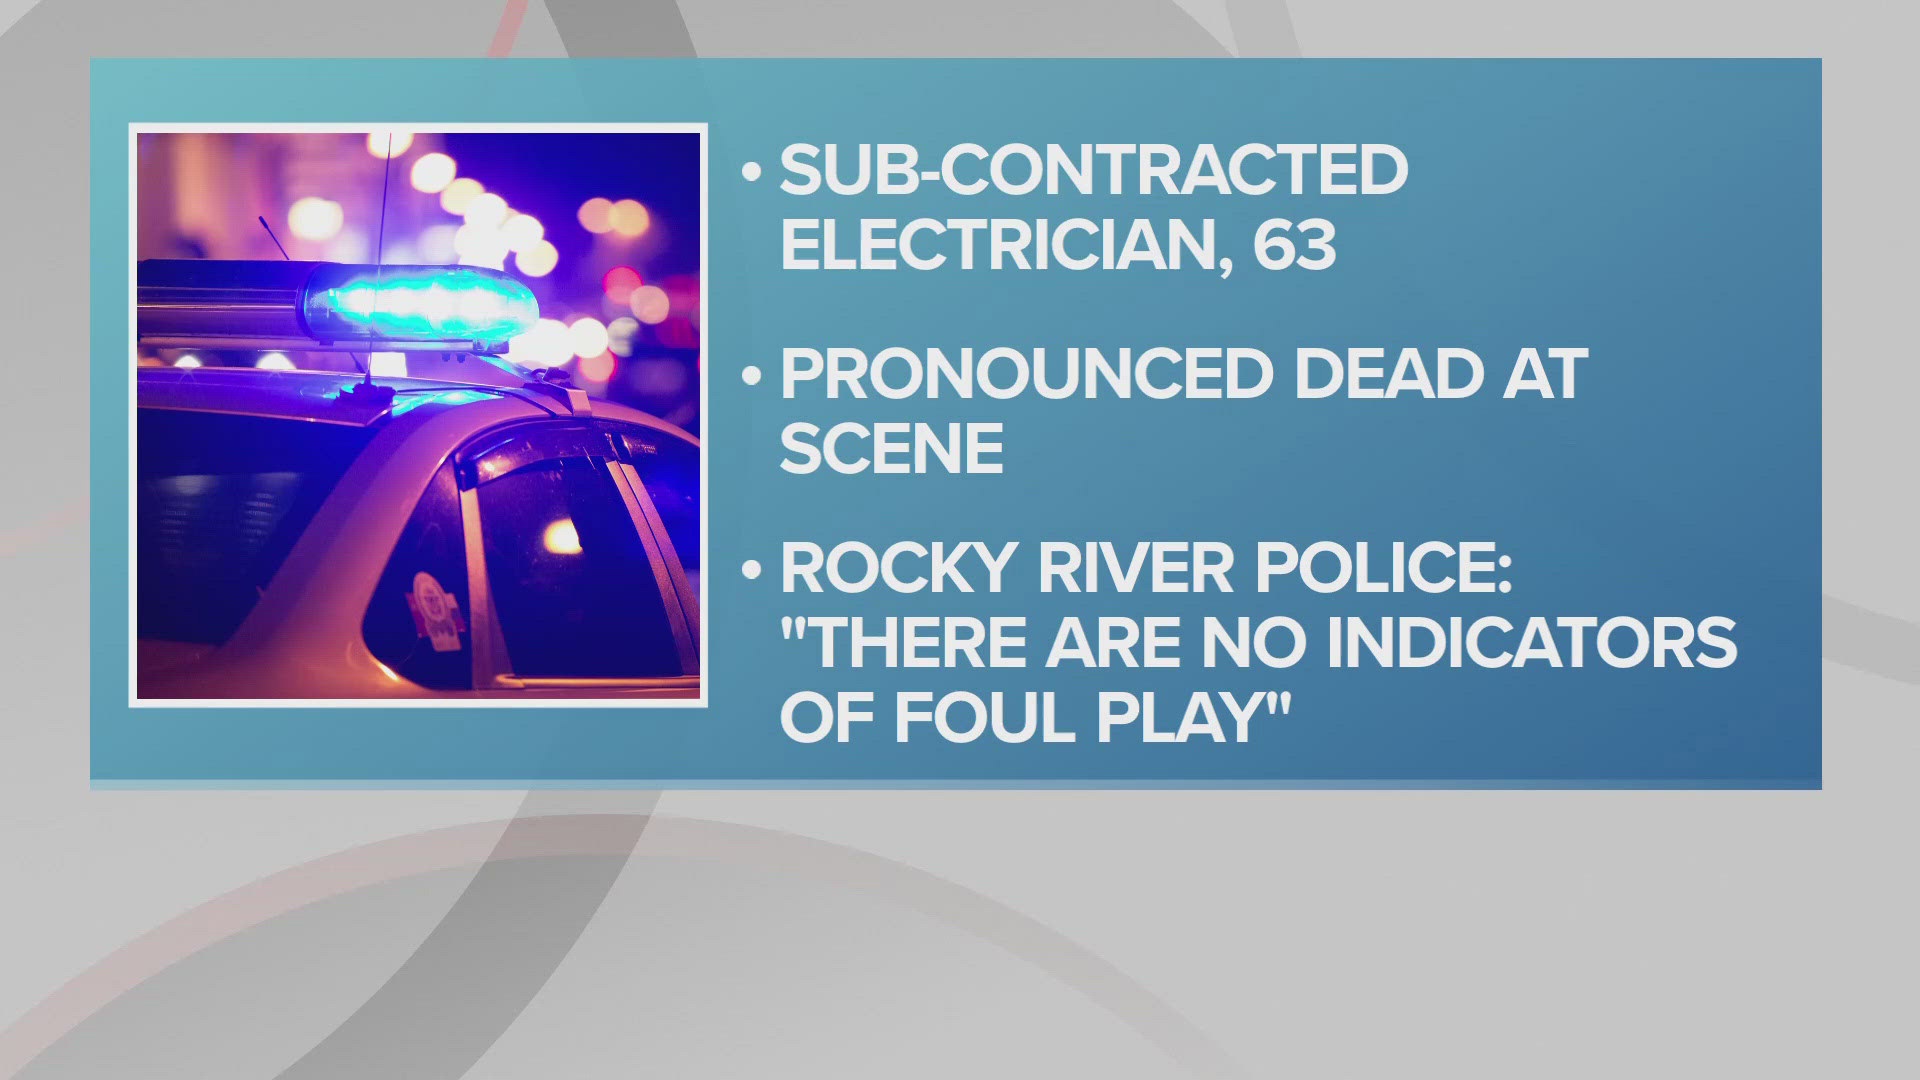 'At this time, there are no indicators of foul play,' according to Rocky River police.